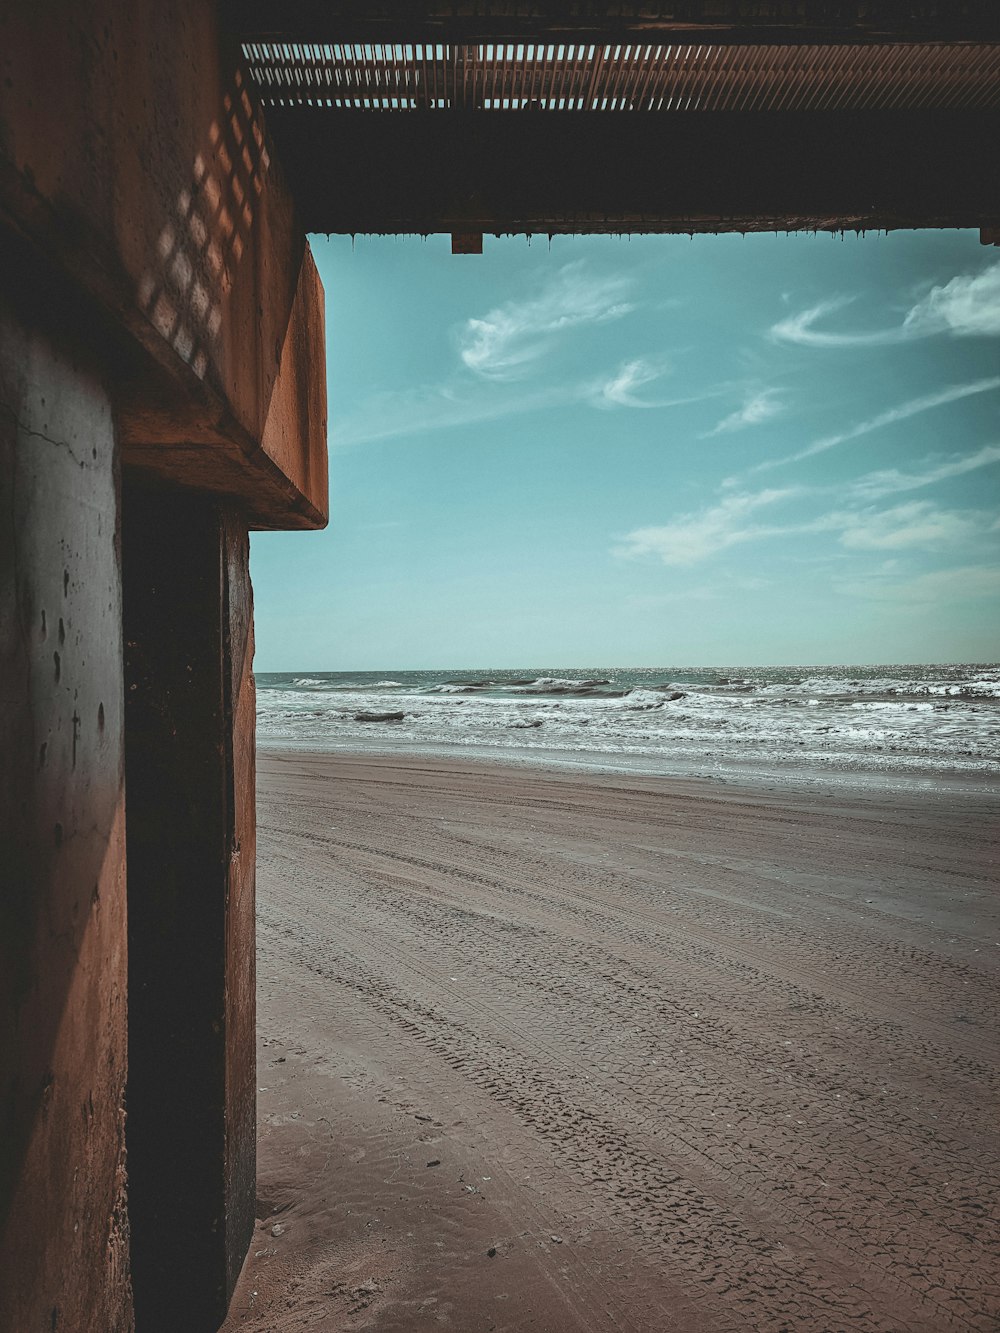 a view of a beach from under a building